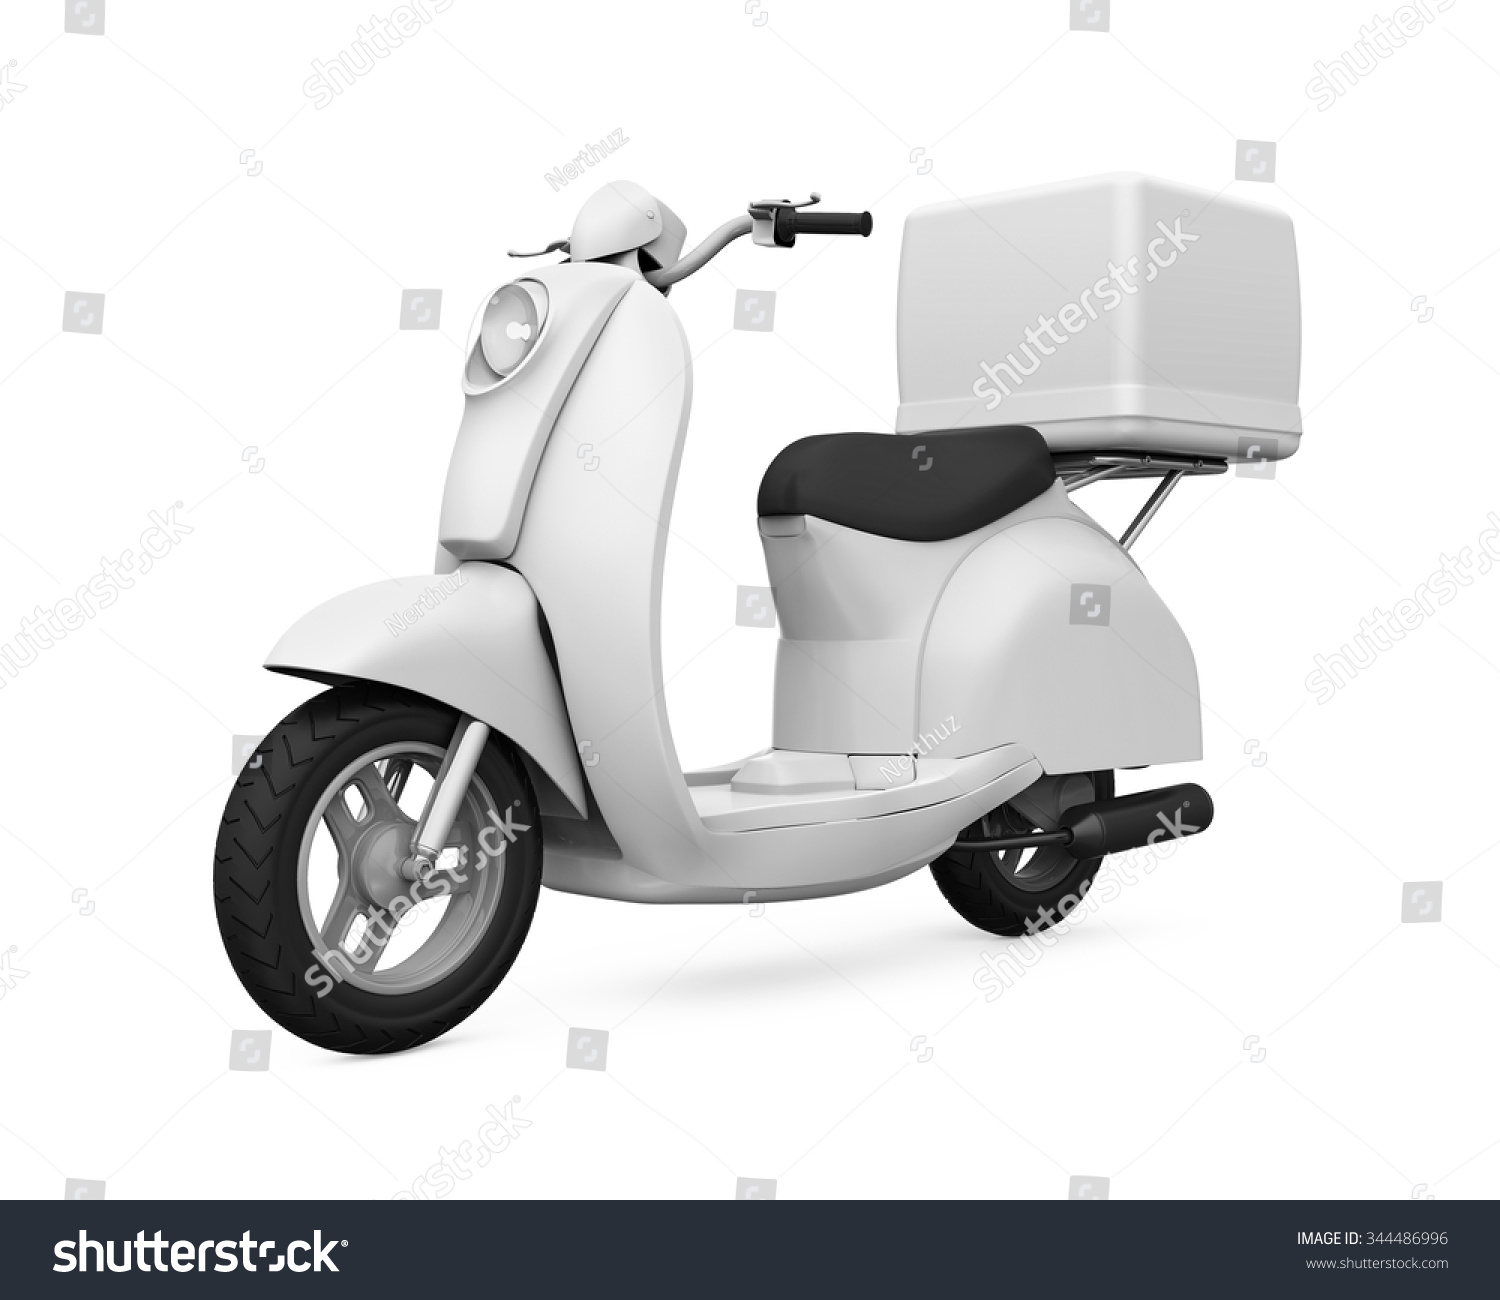 Download Motorcycle Delivery Box Royalty Free Stock Photo 344486996 Avopix Com